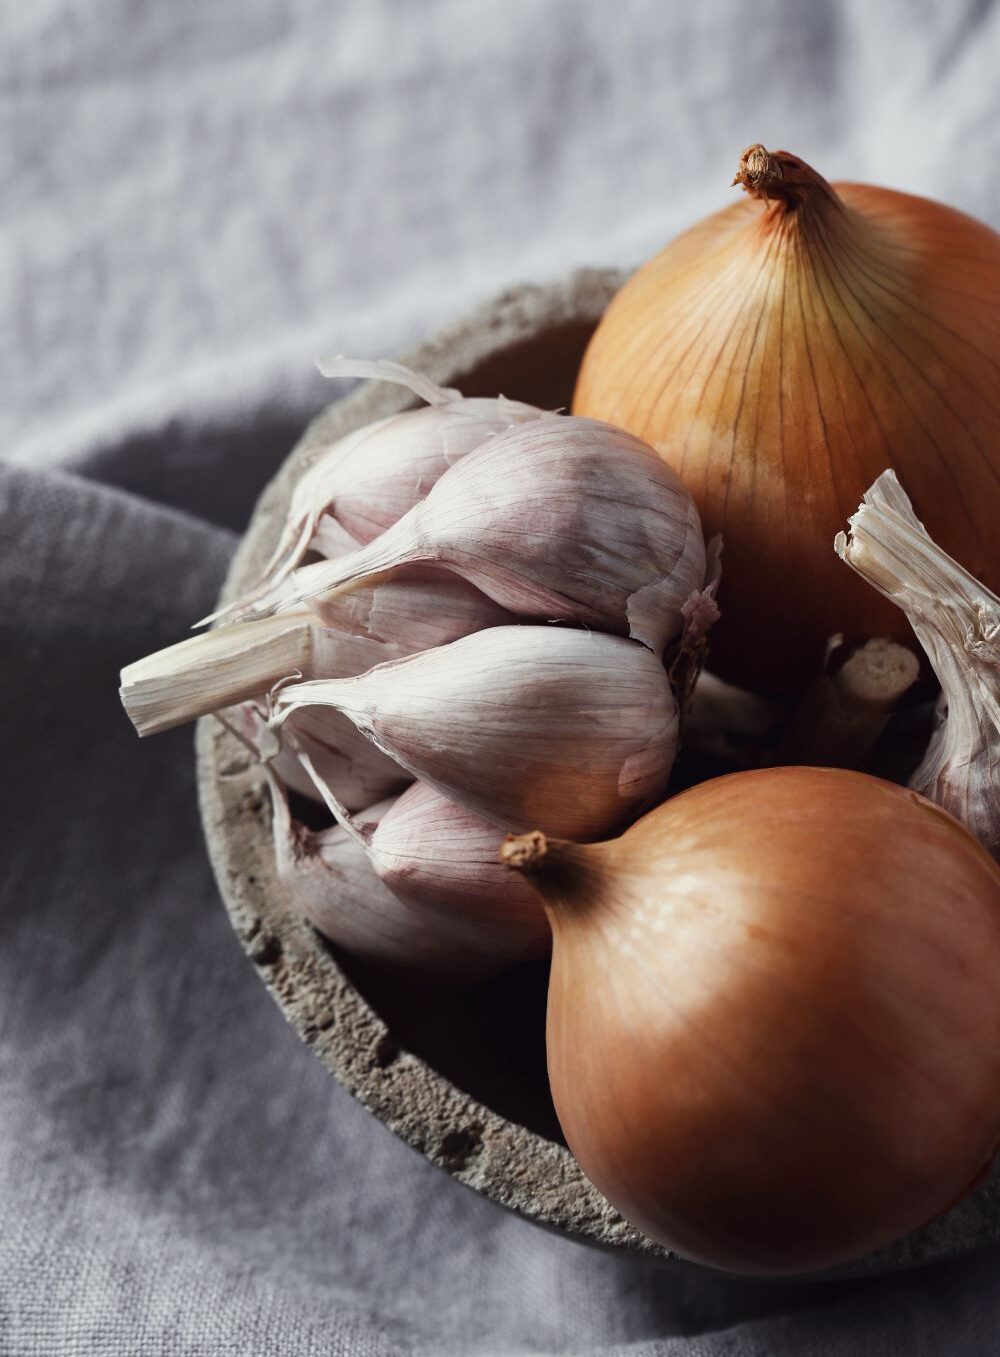 Onions and Garlic, avoid for GERD